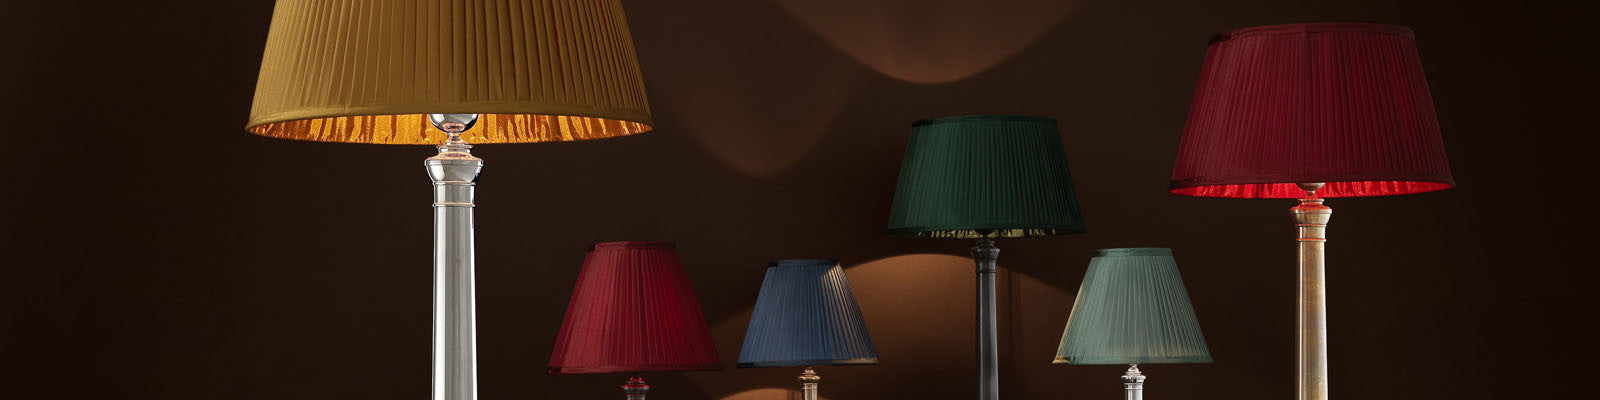 Lamp Shades | OROA - Modern & Luxury Furniture | Official Eichholtz Distributor in the USA